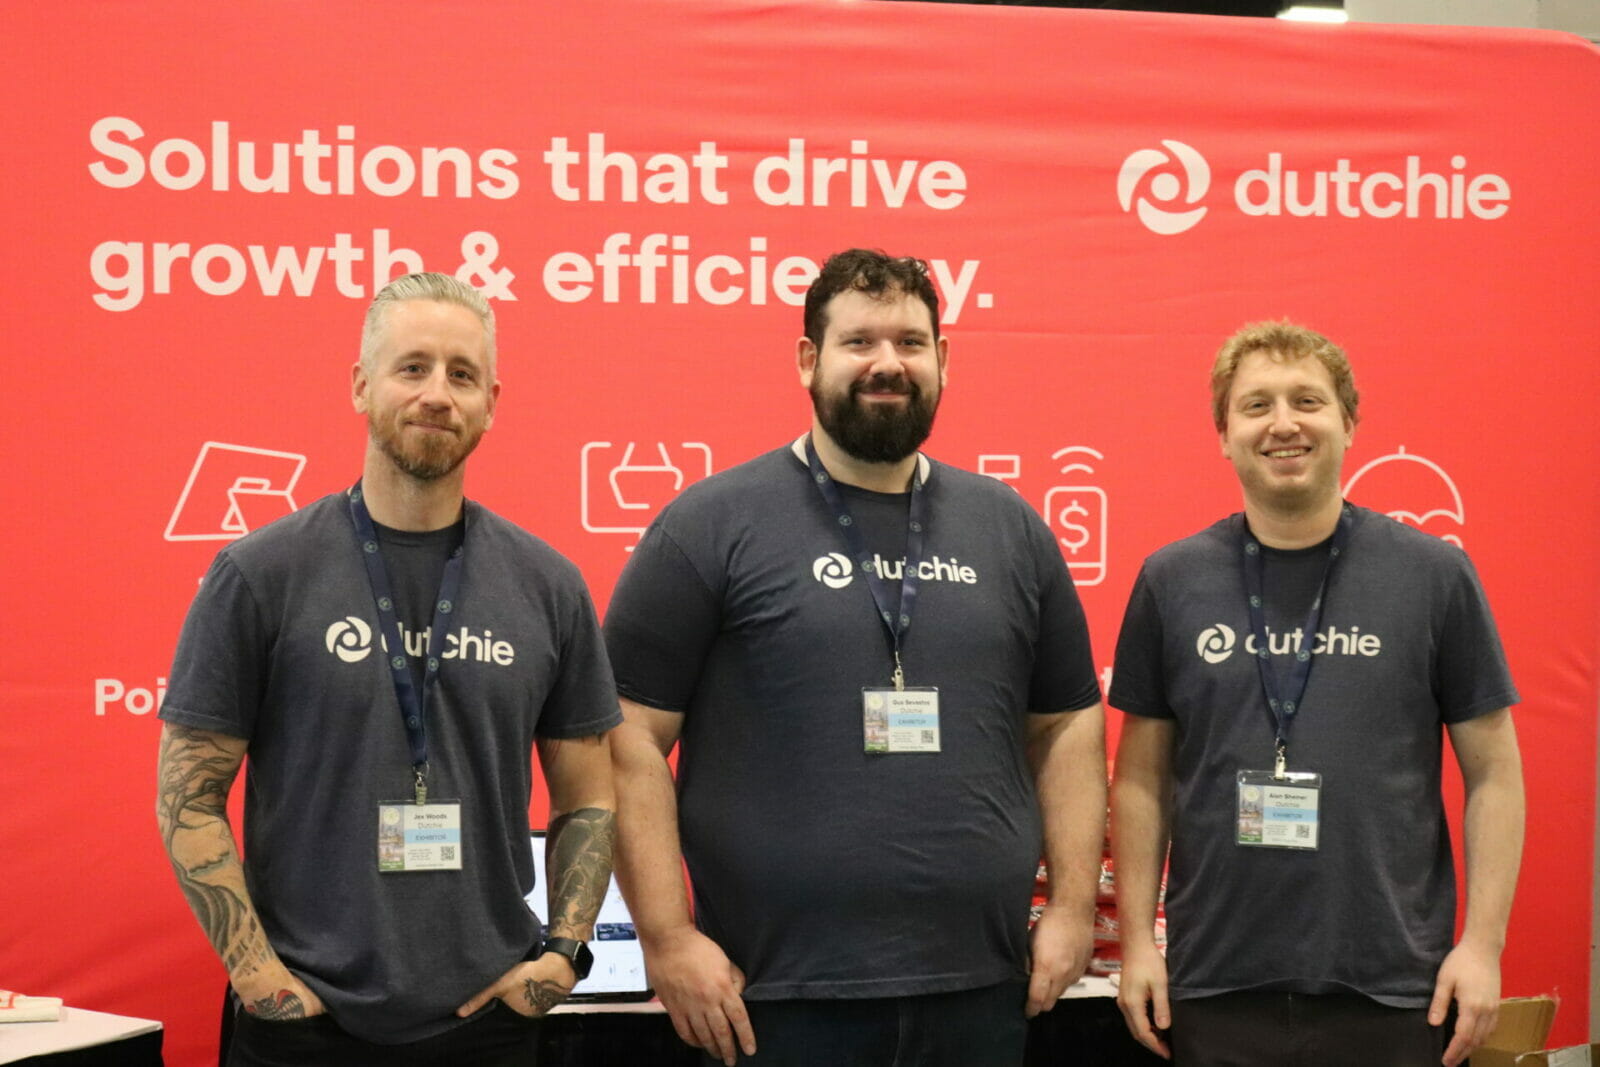 Three men stand in front of a red banner with white marking and drawings. Each of them wear a lanyard and a gray t-shirt which reads "dutchie."